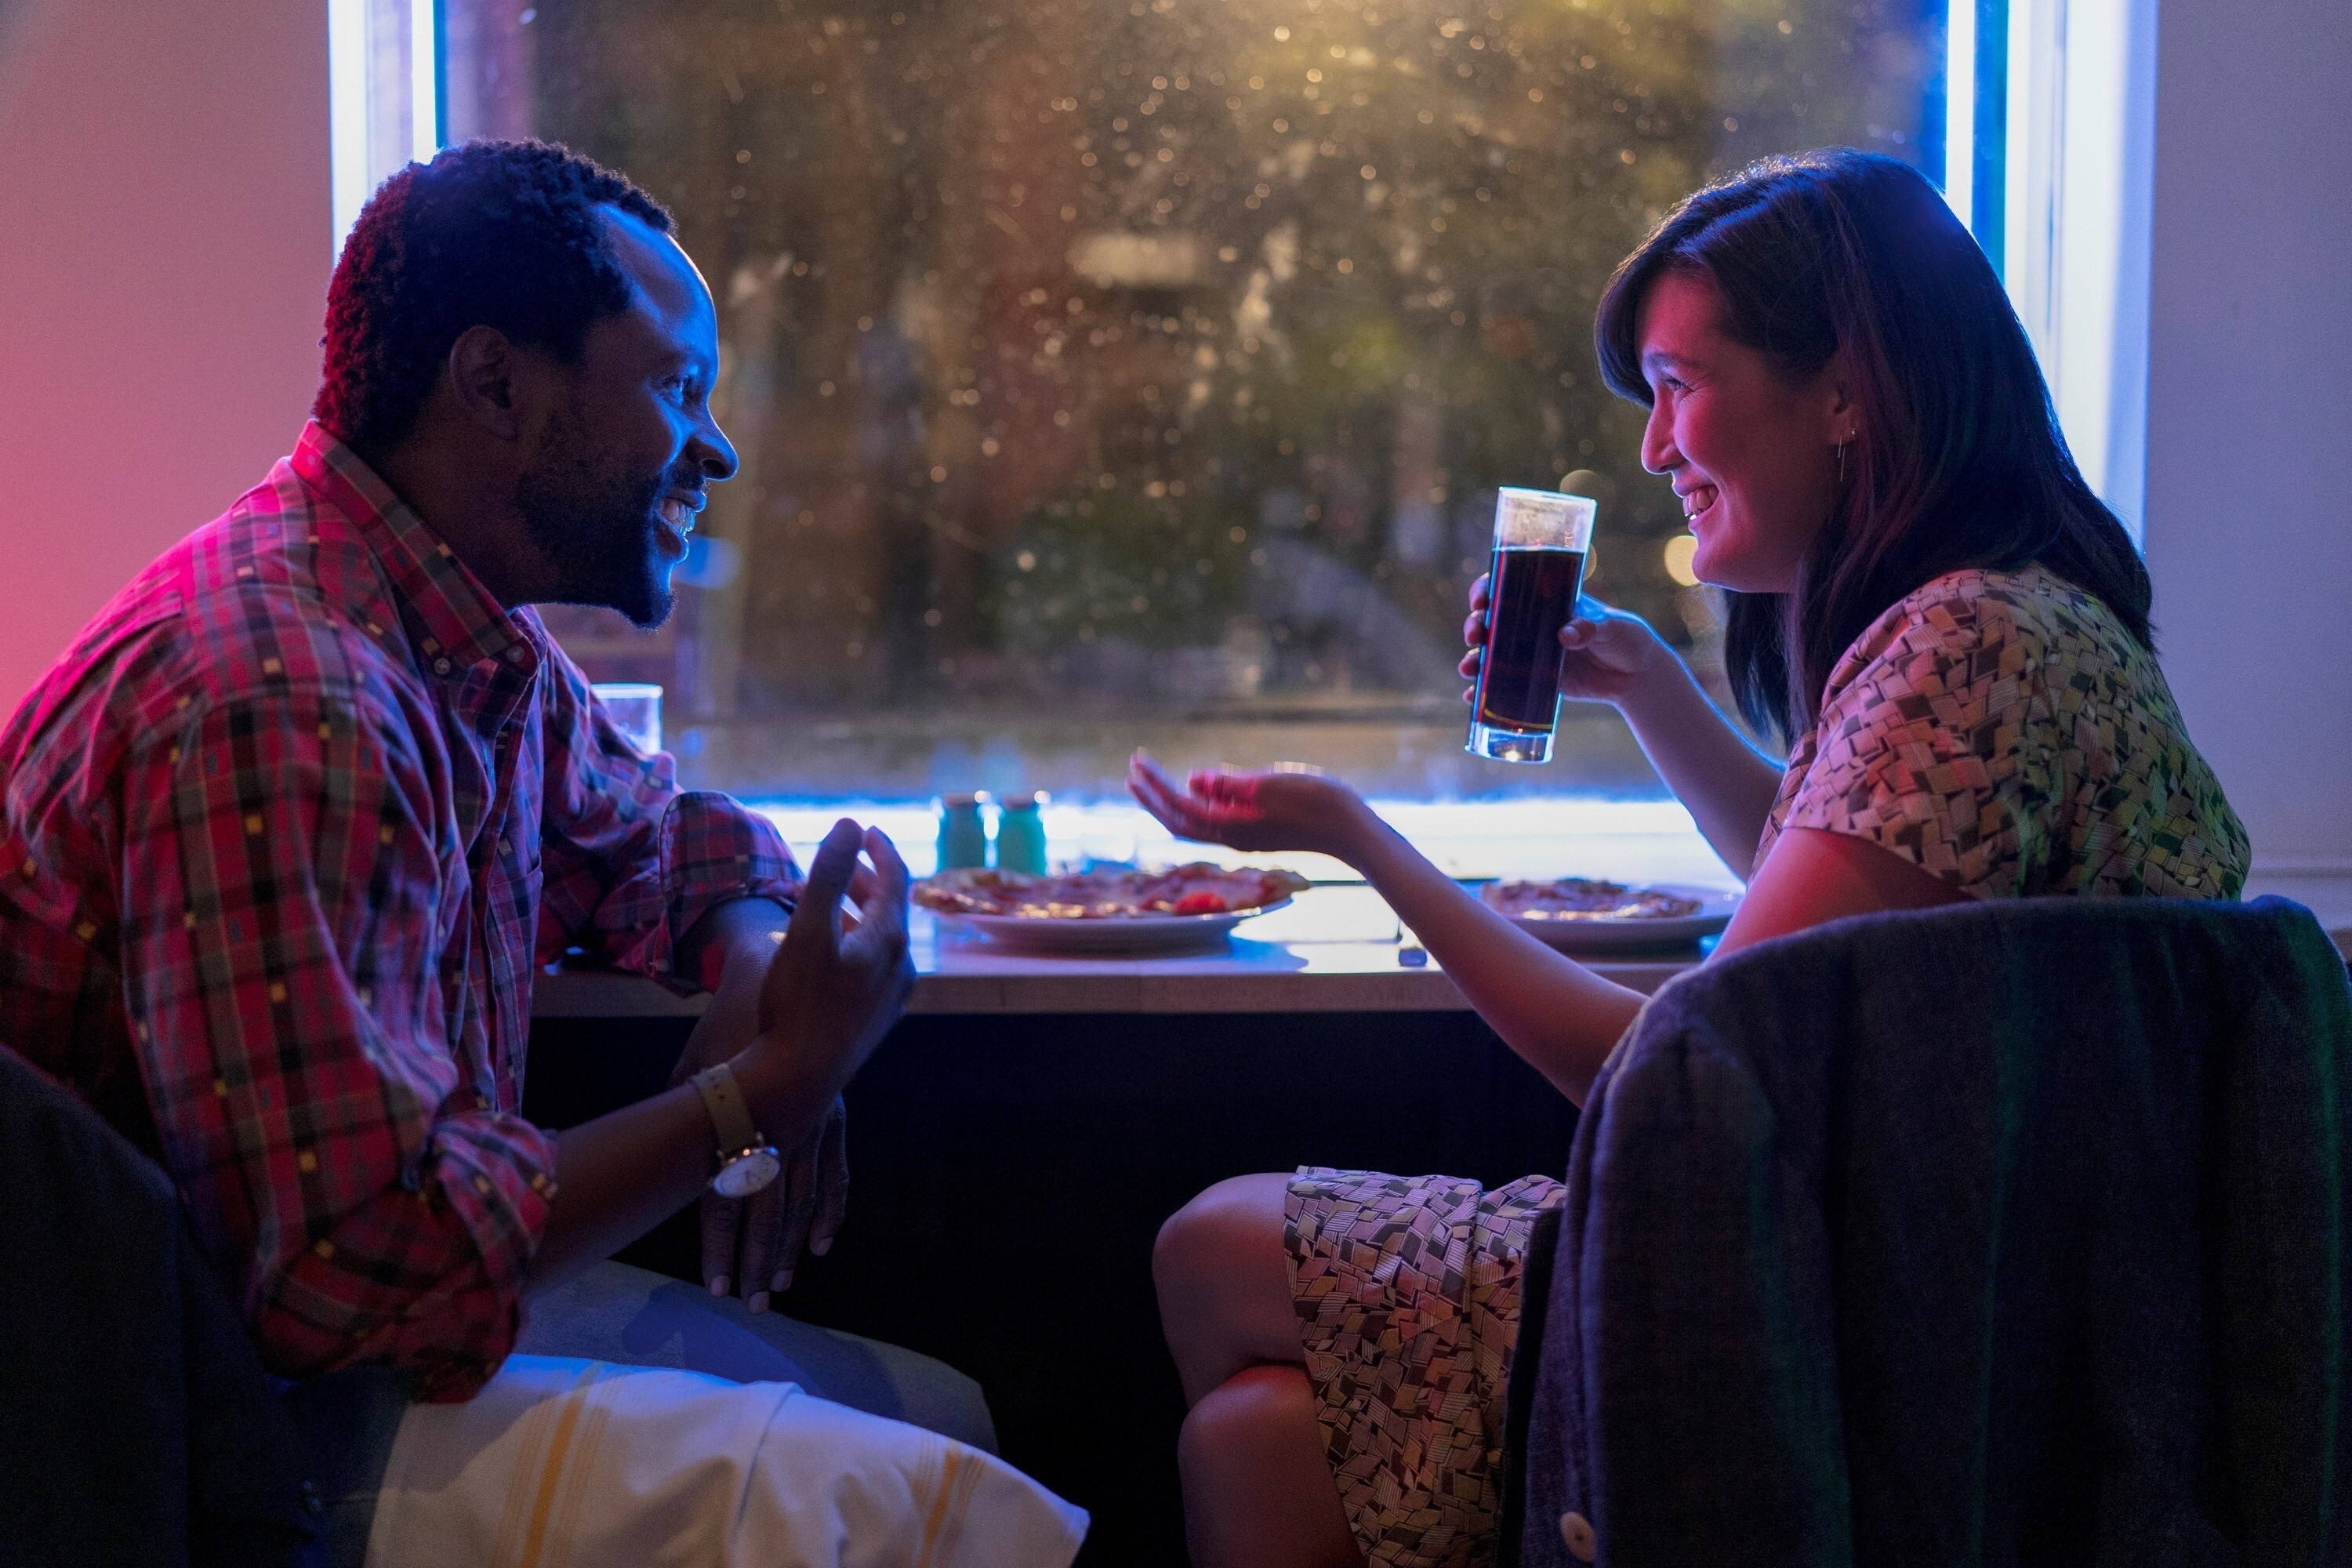 A girl and guy laughing at a table in a diner at night